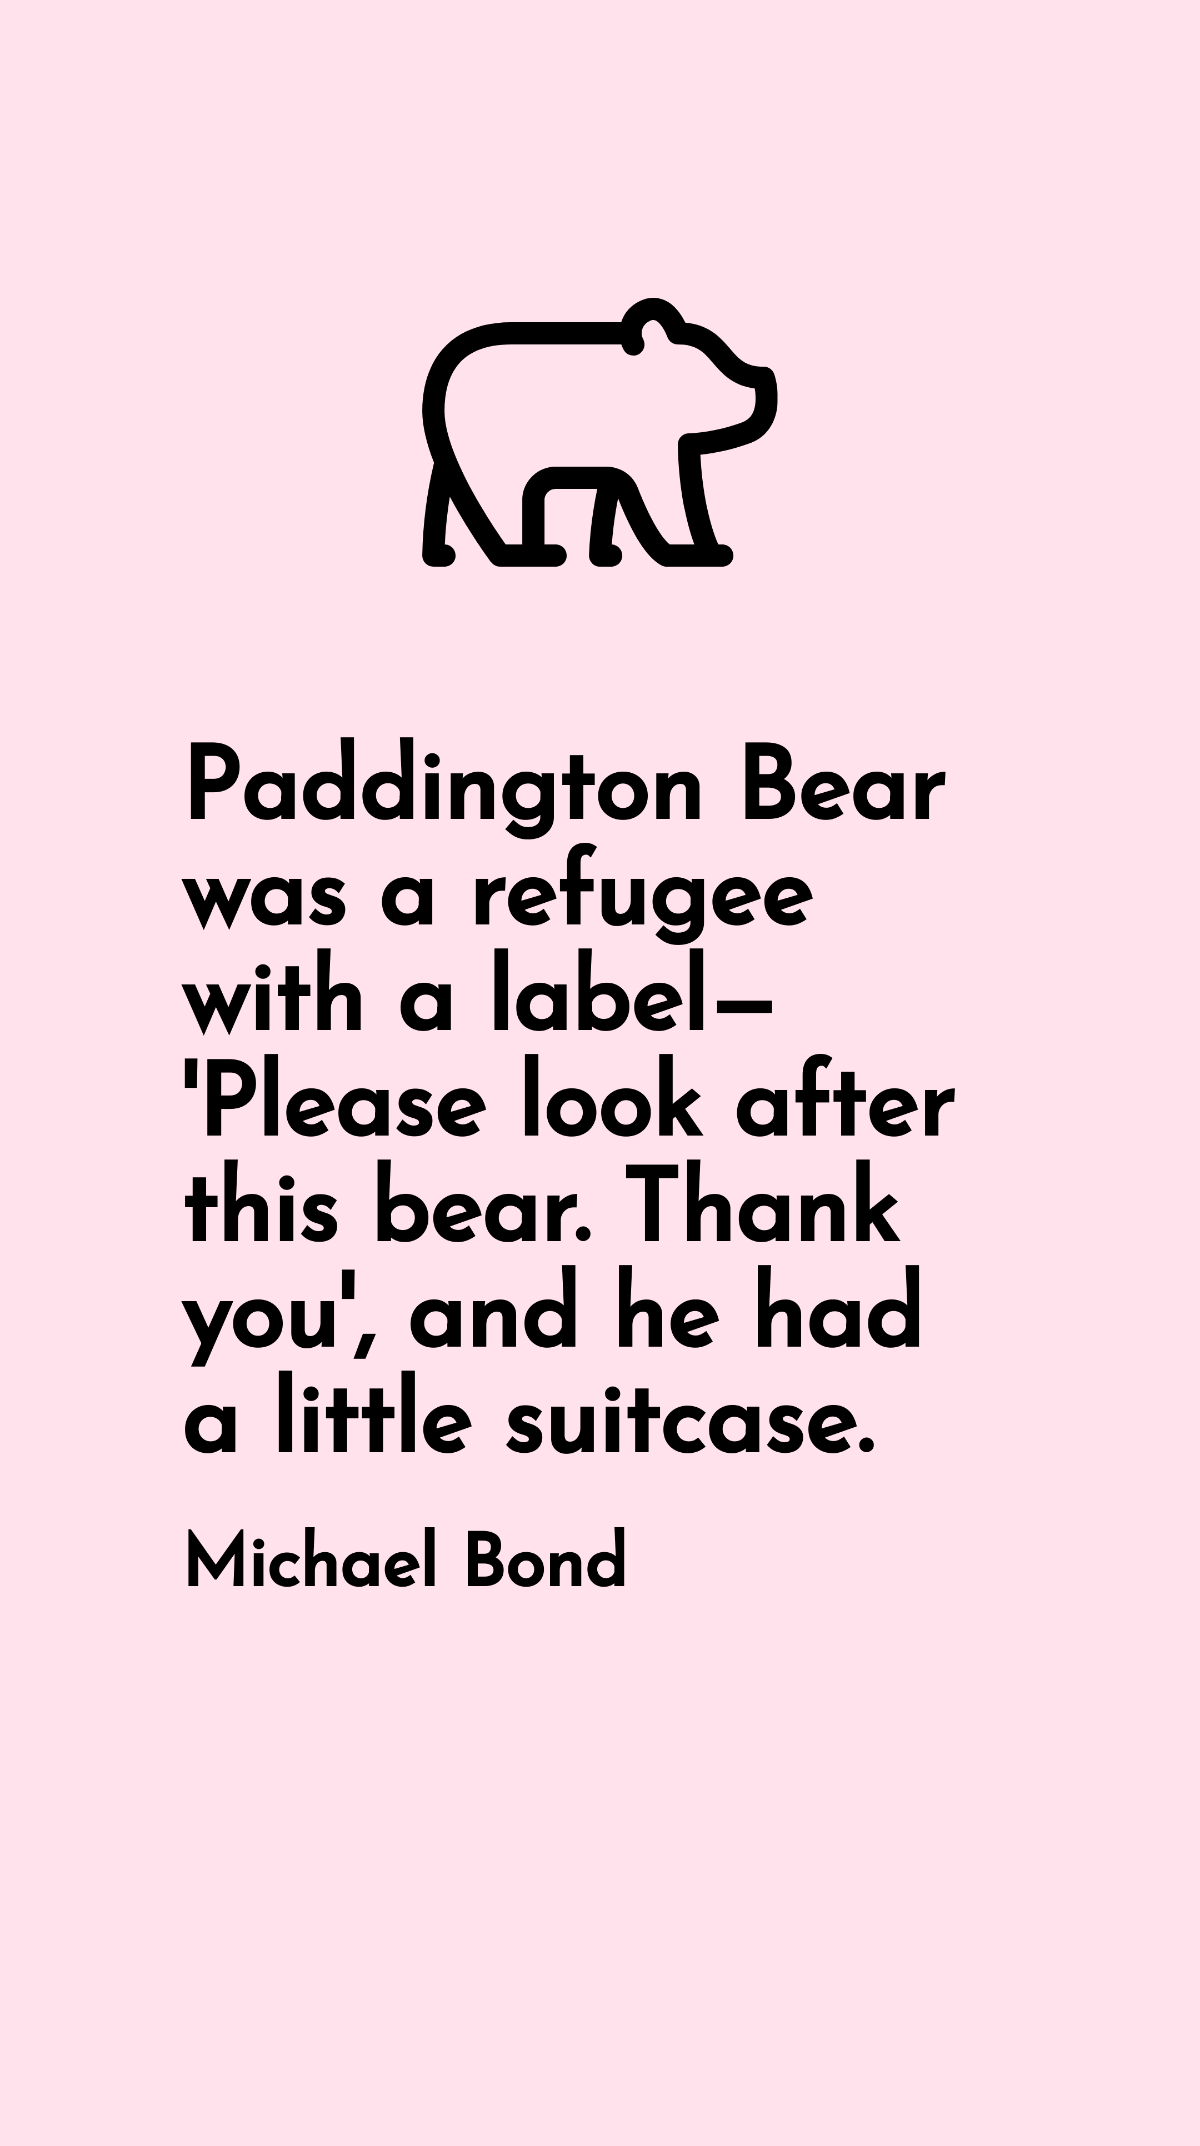 Michael Bond - Paddington Bear was a refugee with a label - 'Please look after this bear. Thank you', and he had a little suitcase.